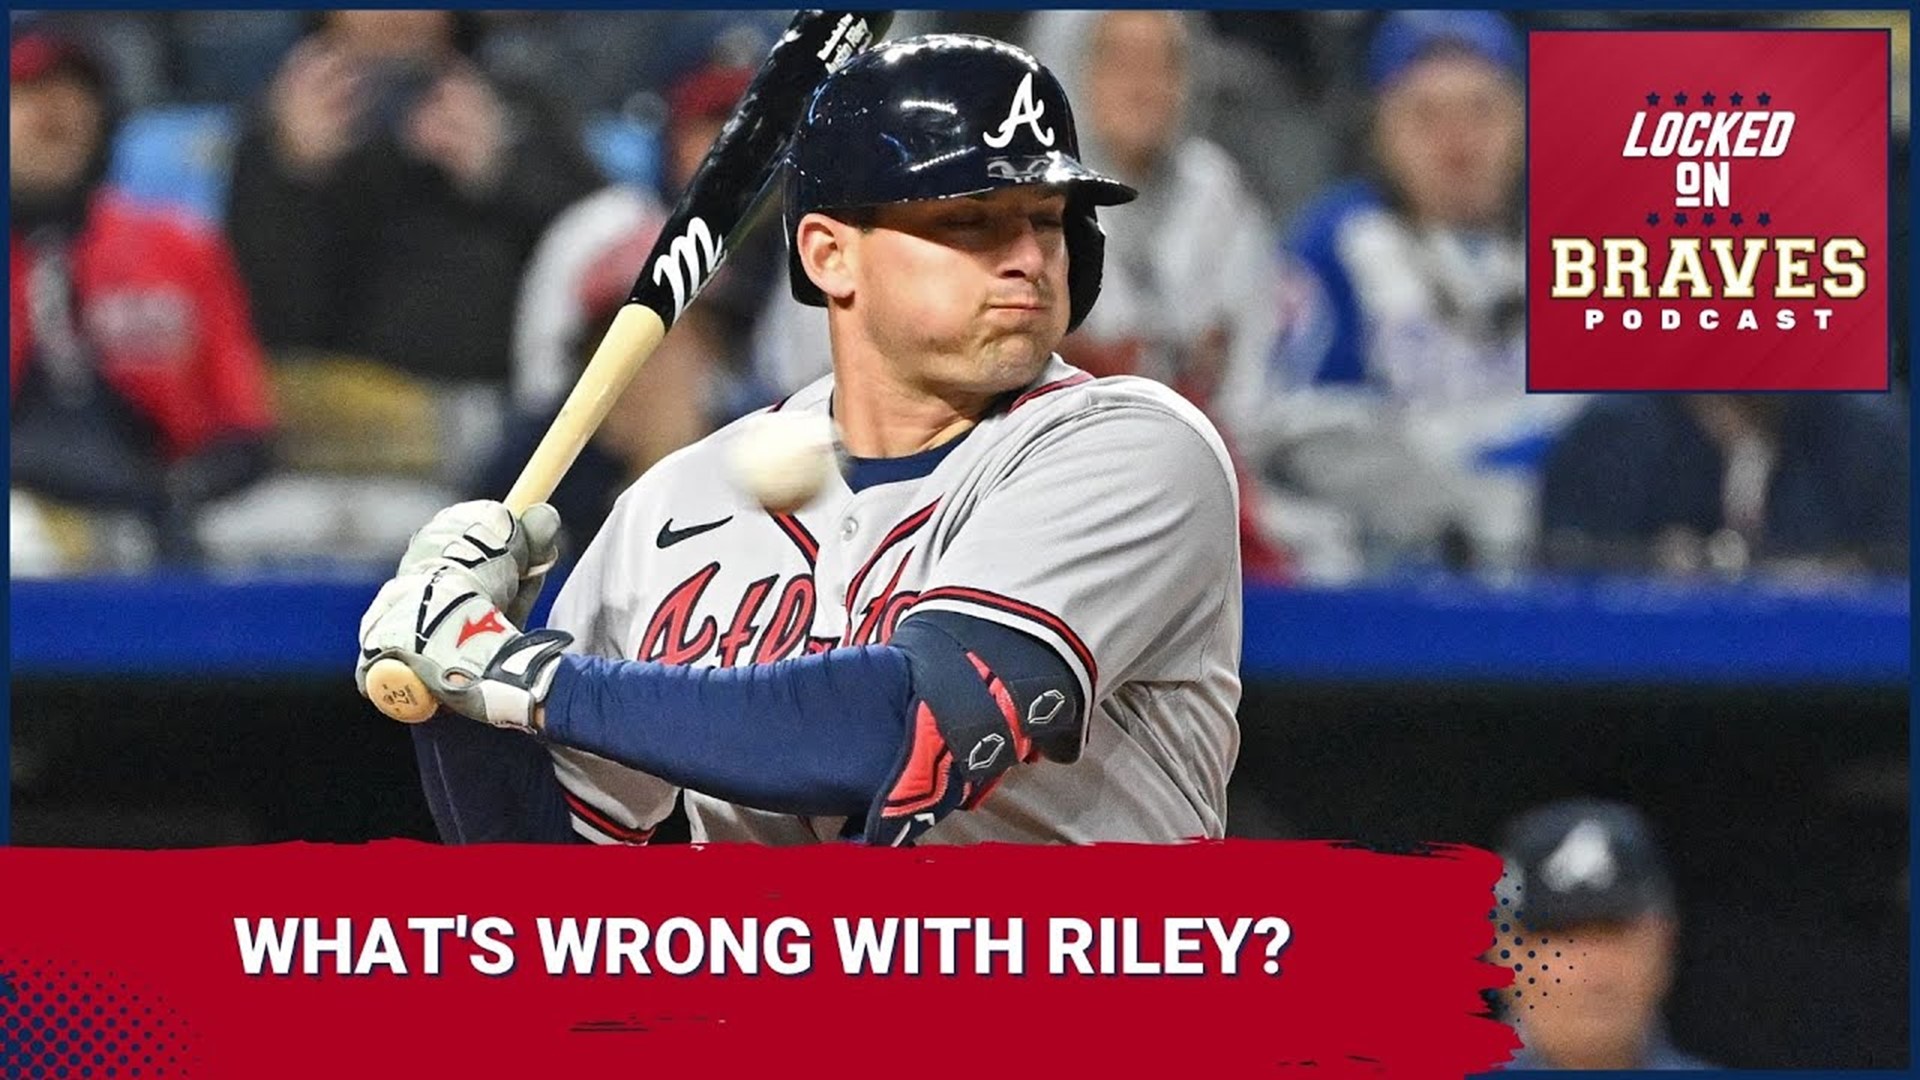 Win a Signed Austin Riley Jersey